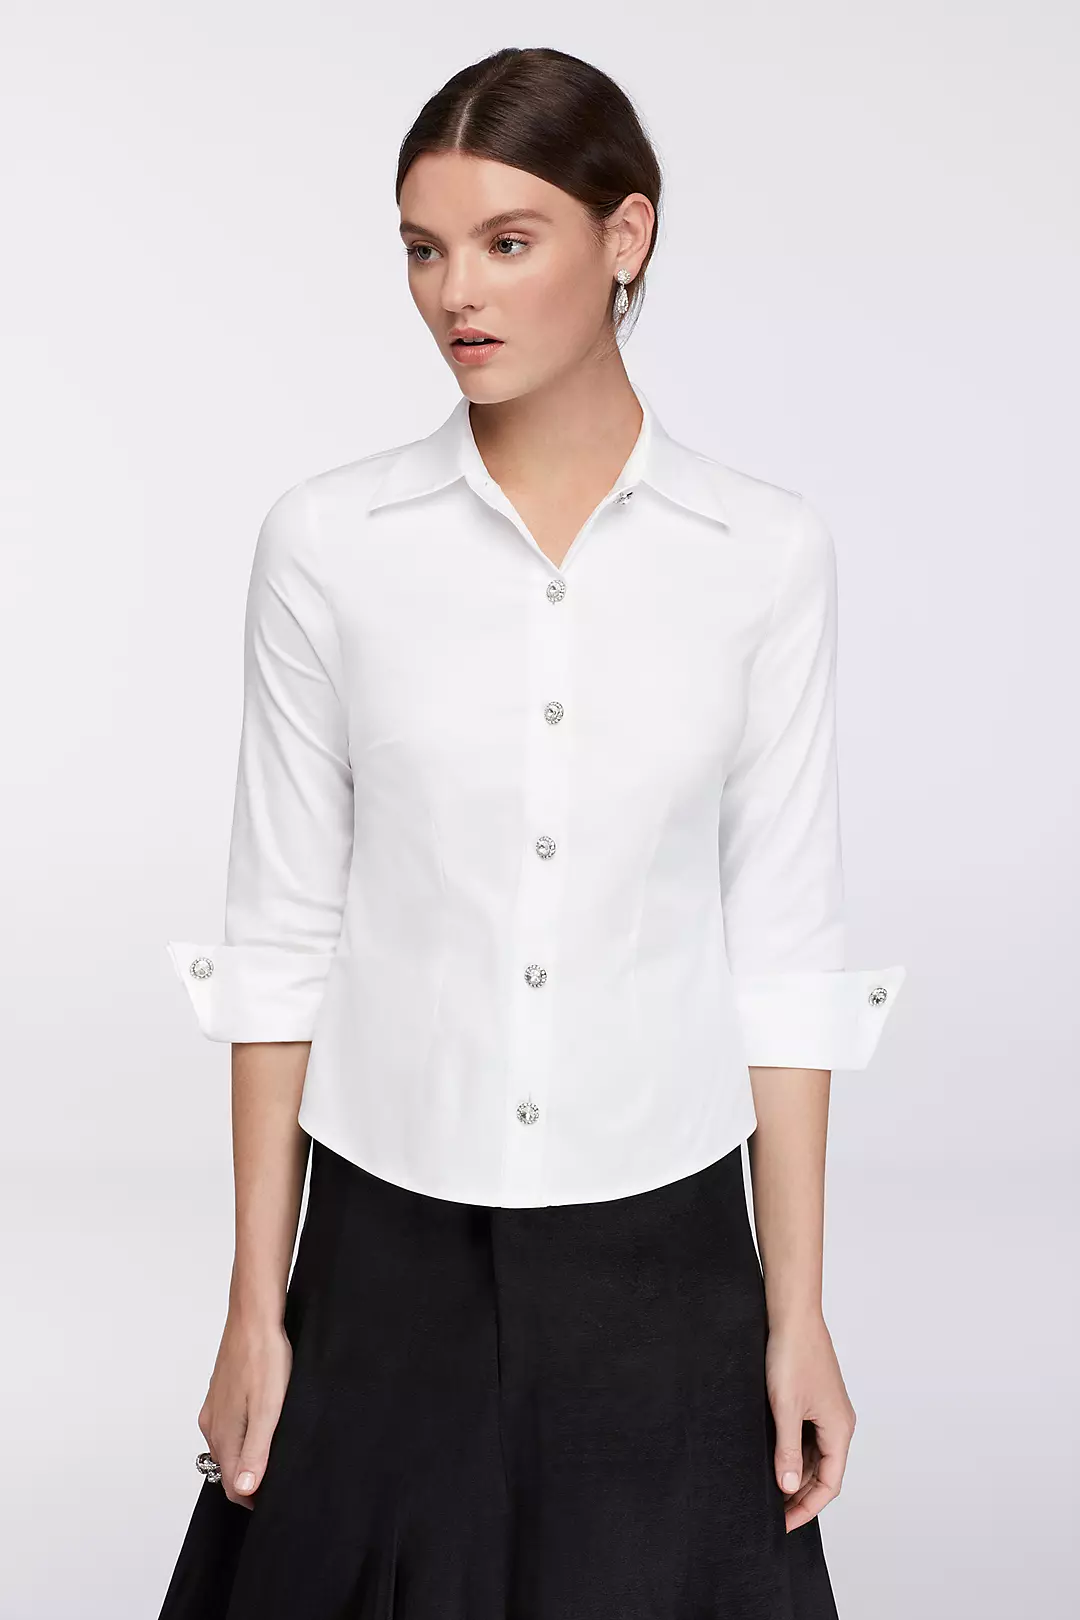 Collared 3/4 Sleeve Blouse with Rhinestone Buttons Image